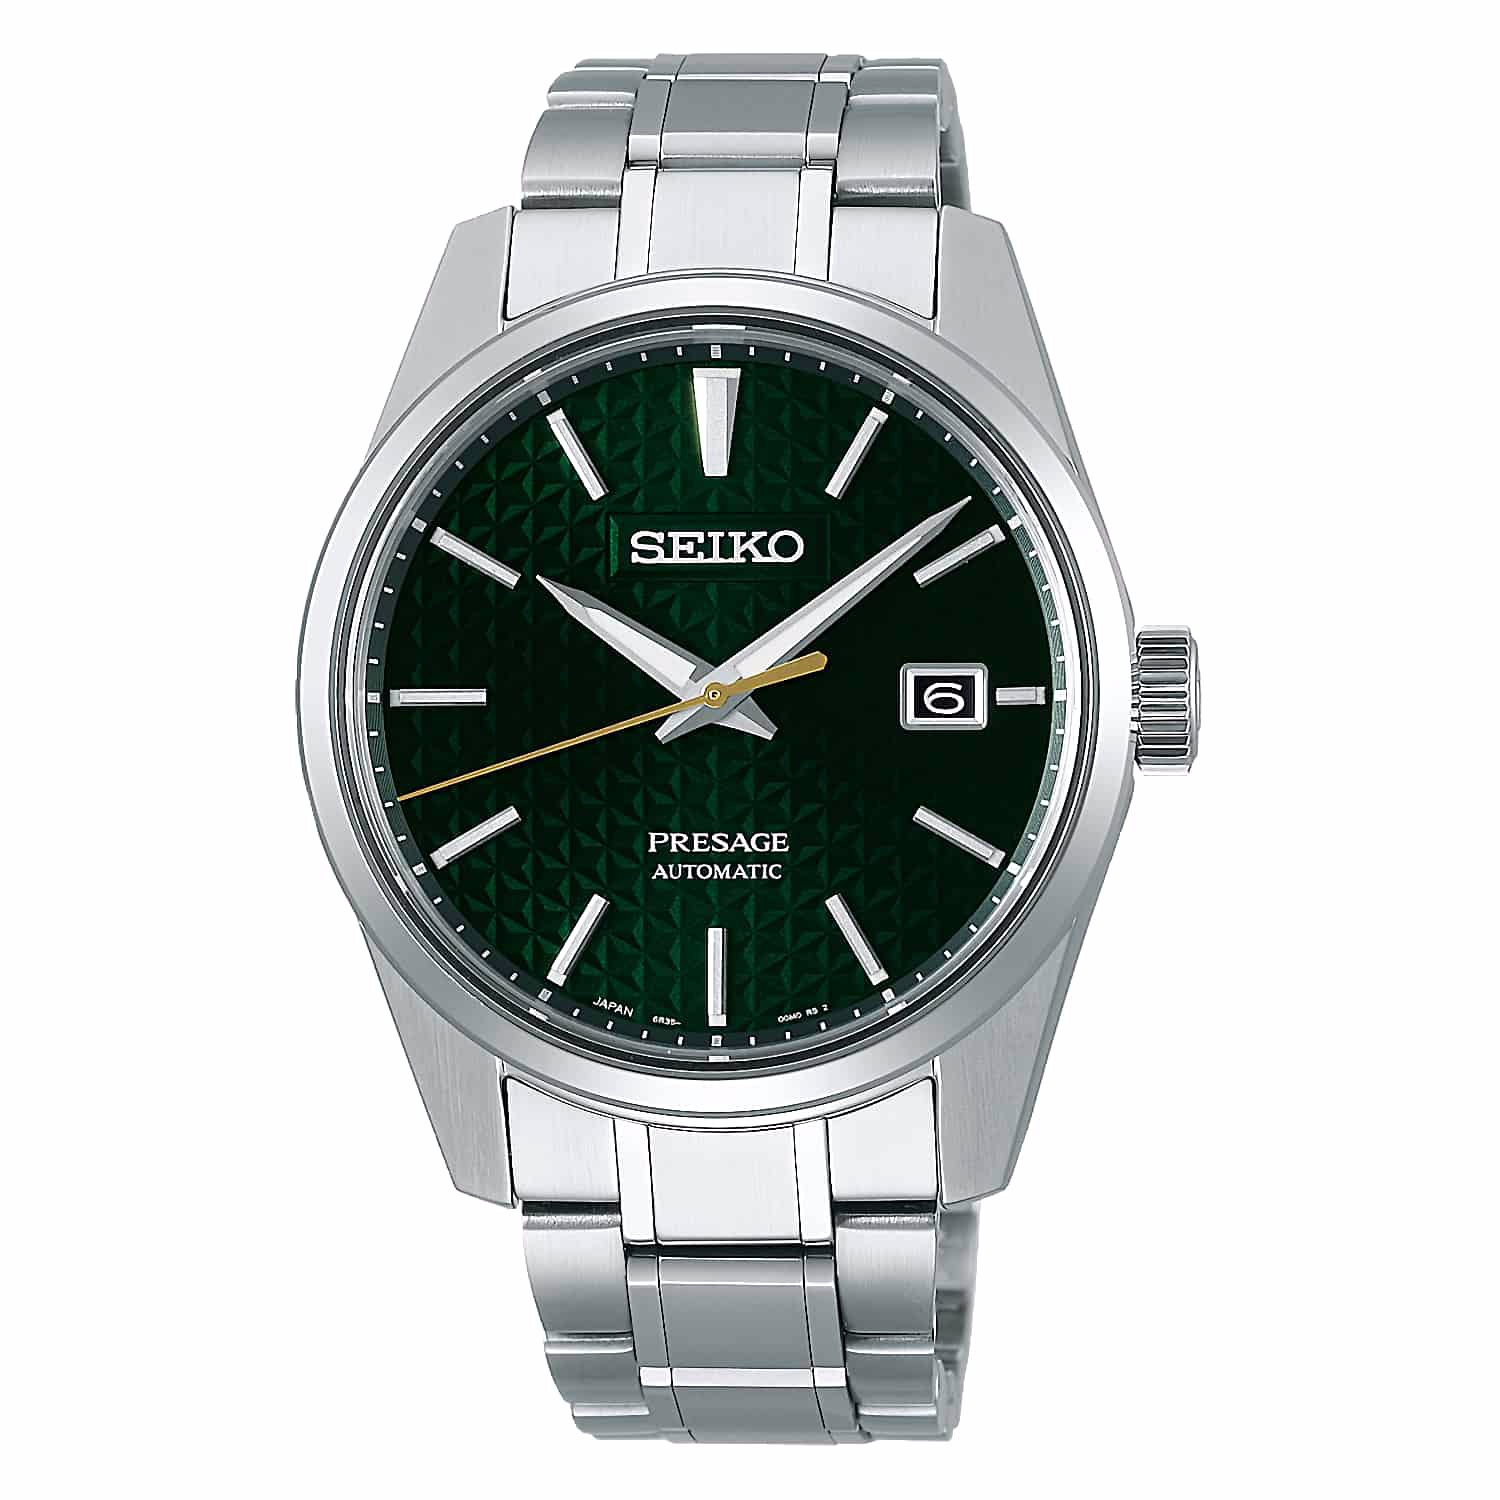 SPB169J1 SEIKO Presage Sharp Edged Series Watch. Since time immemorial, a central aspect of the Japanese sense of beauty has been simplicity.  To create objects or images of refinement and grace with few elements and no extraneous decoration has long been